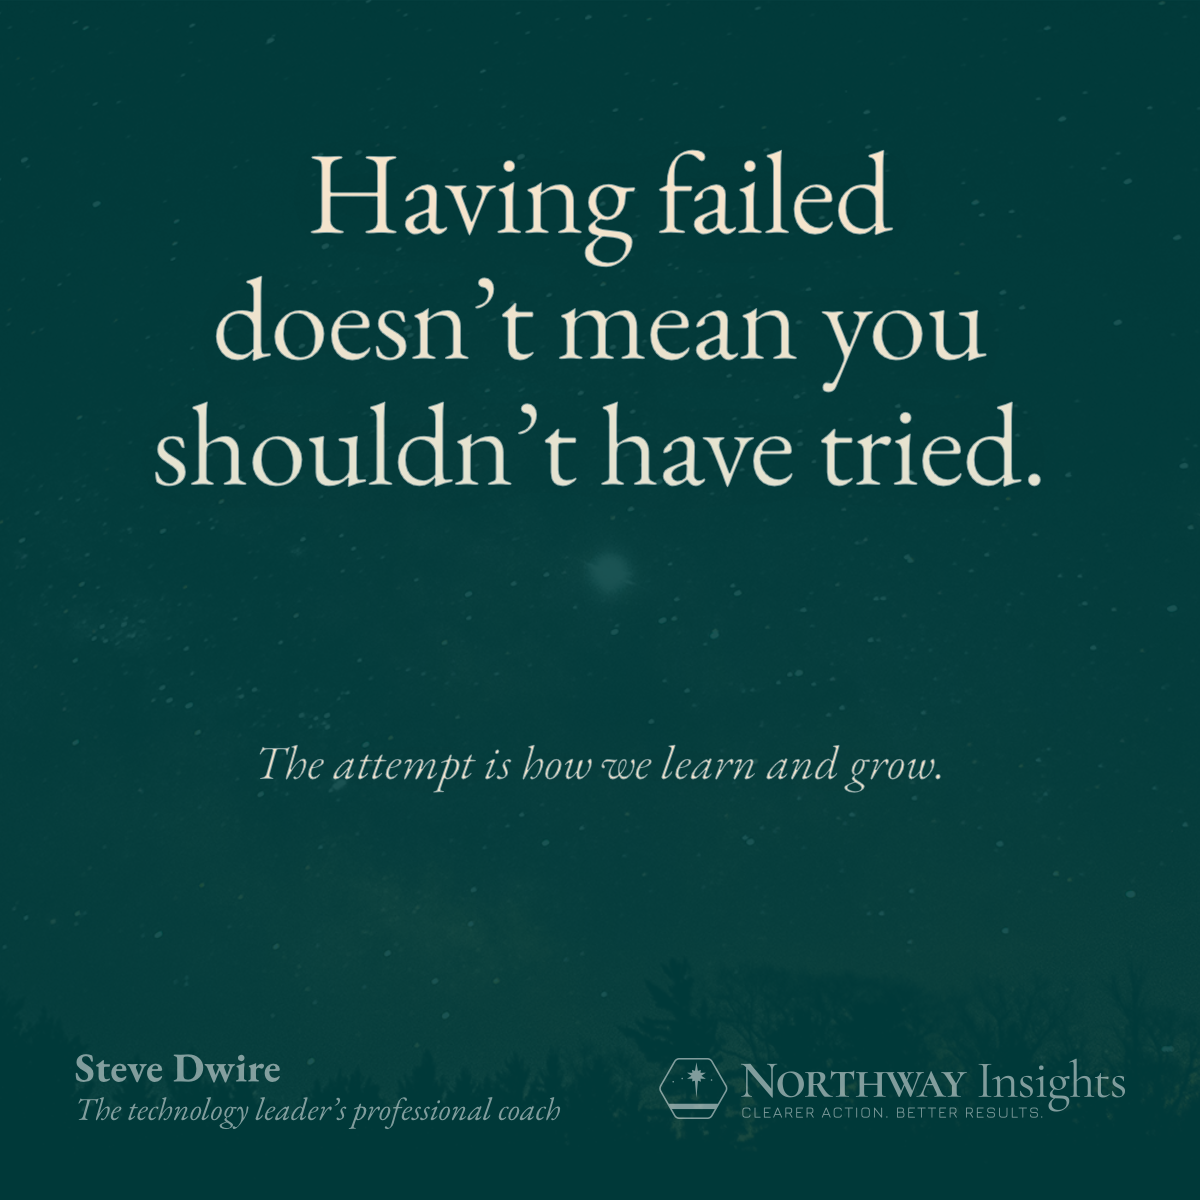 Having failed doesn’t mean you shouldn’t have tried.